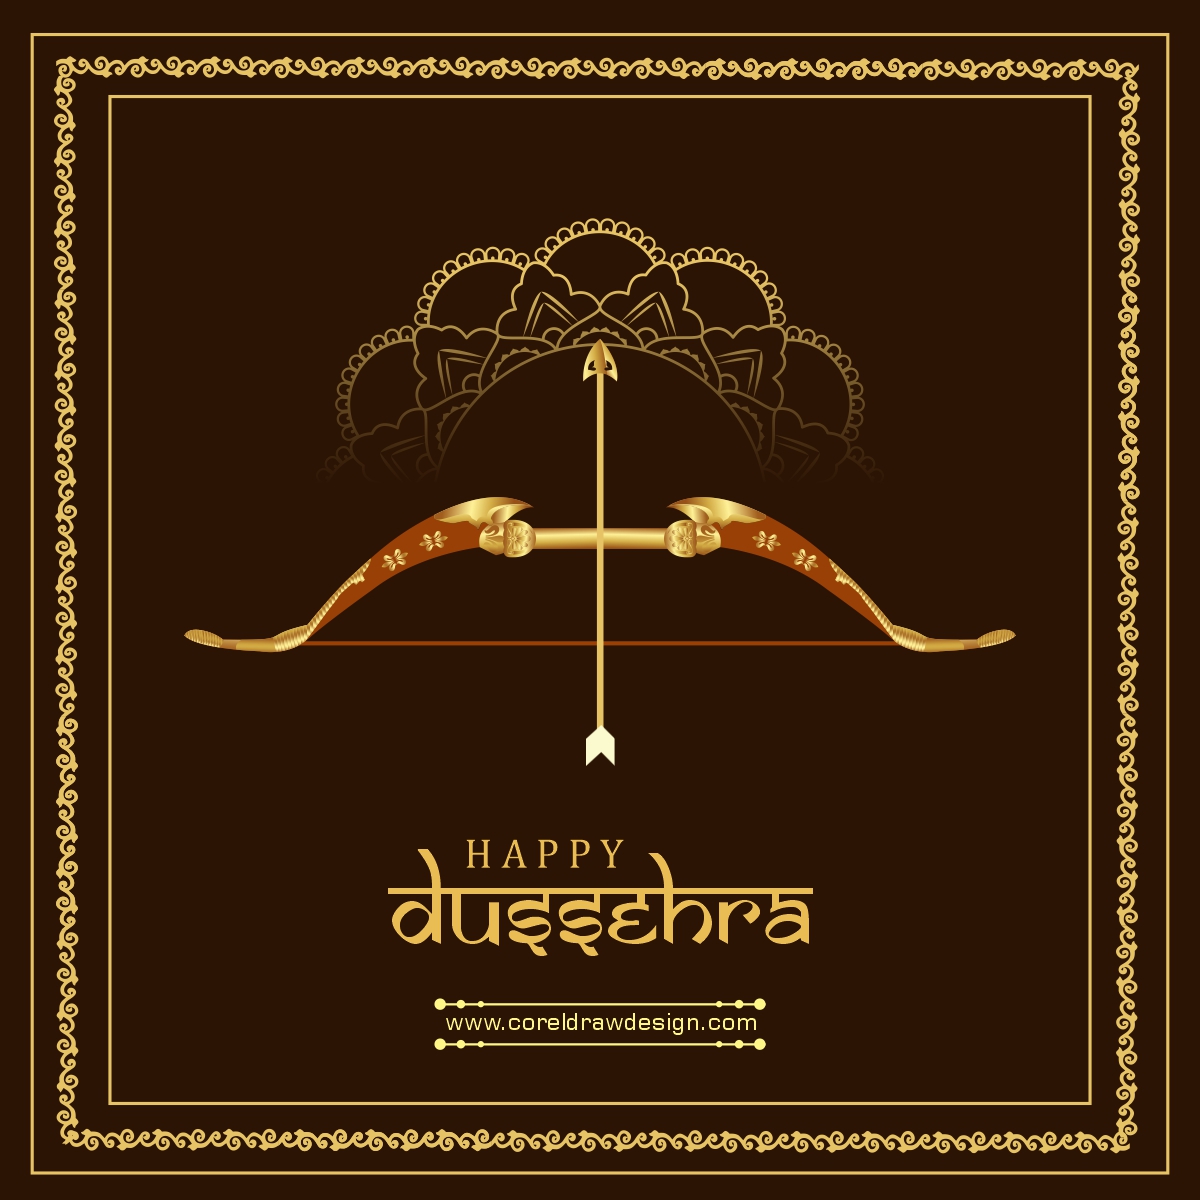 Flat Design Happy Dussehra Background With Bow And Arrow Free Vector